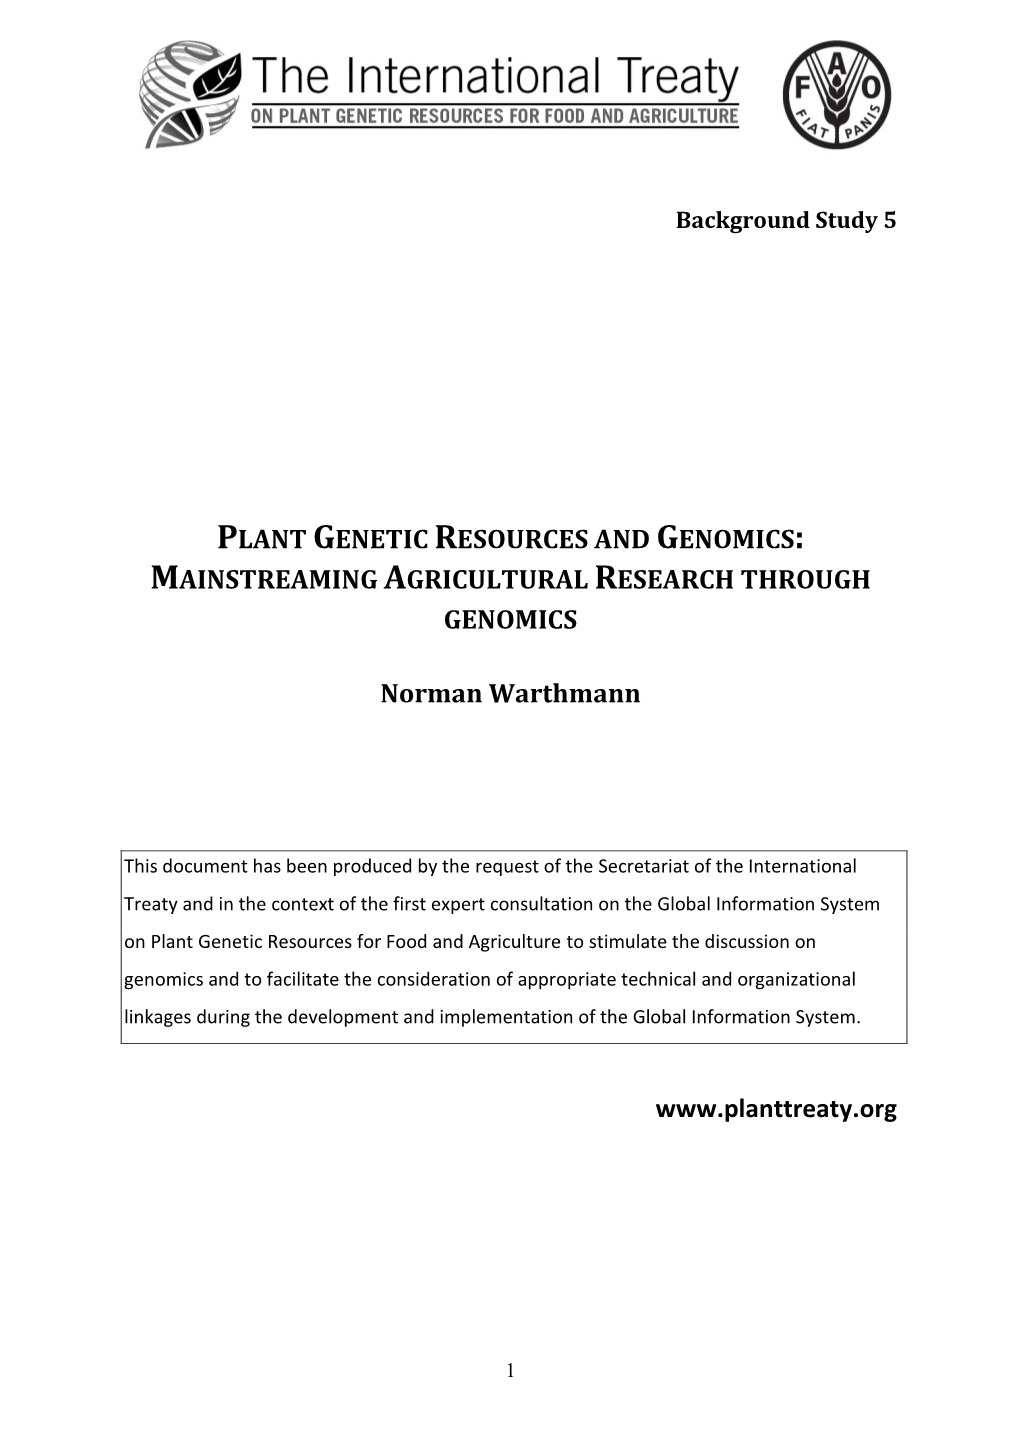 Plant Genetic Resources and Genomics: Mainstreaming Agricultural Research Through Genomics